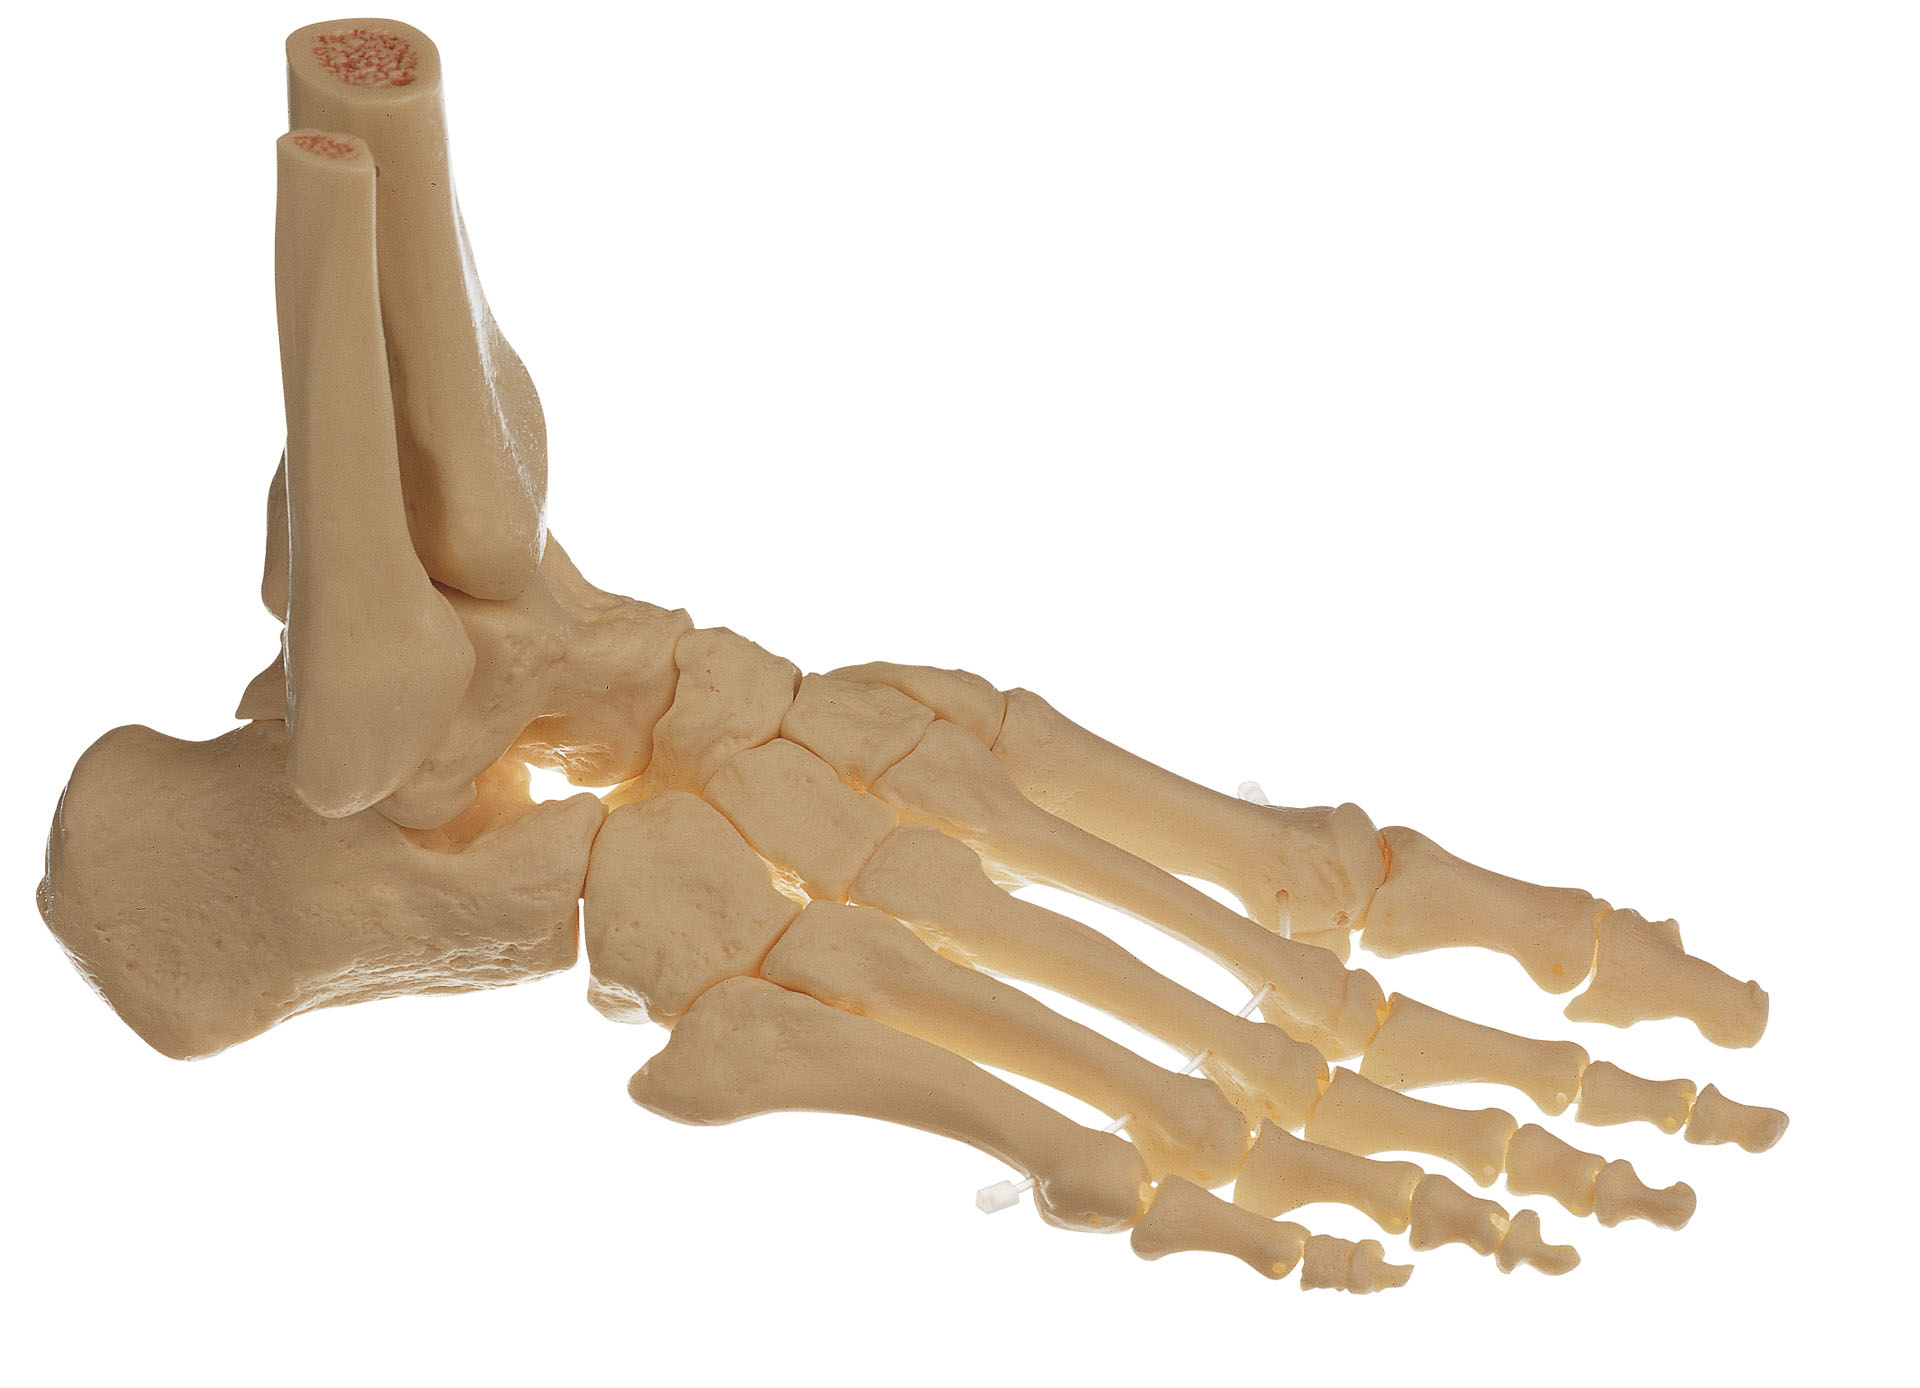 Skeleton of the Right Foot (Movable Joints)